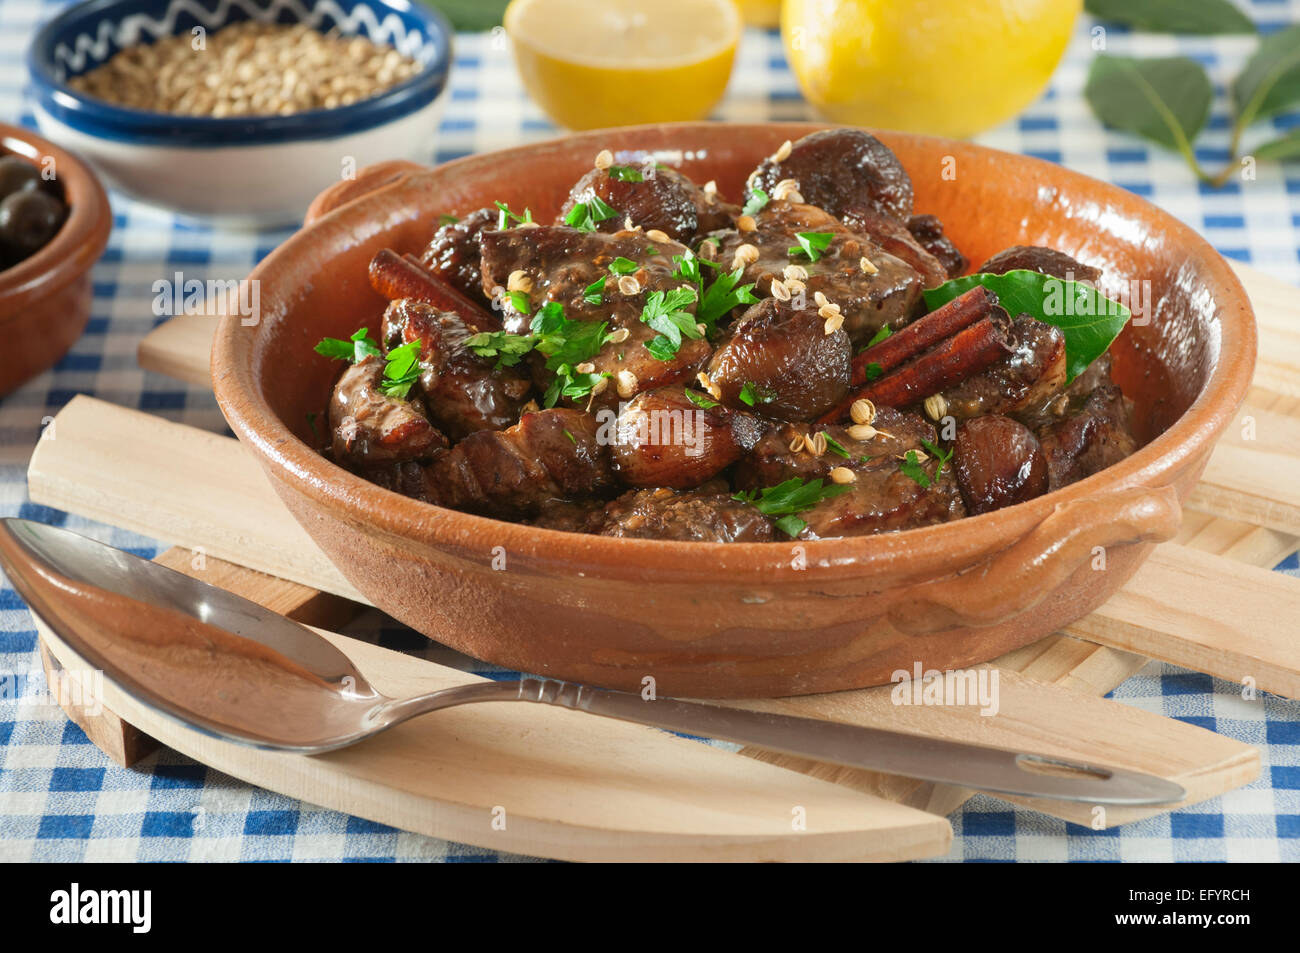 Afelia. Pork with red wine and coriander seed. Stock Photo